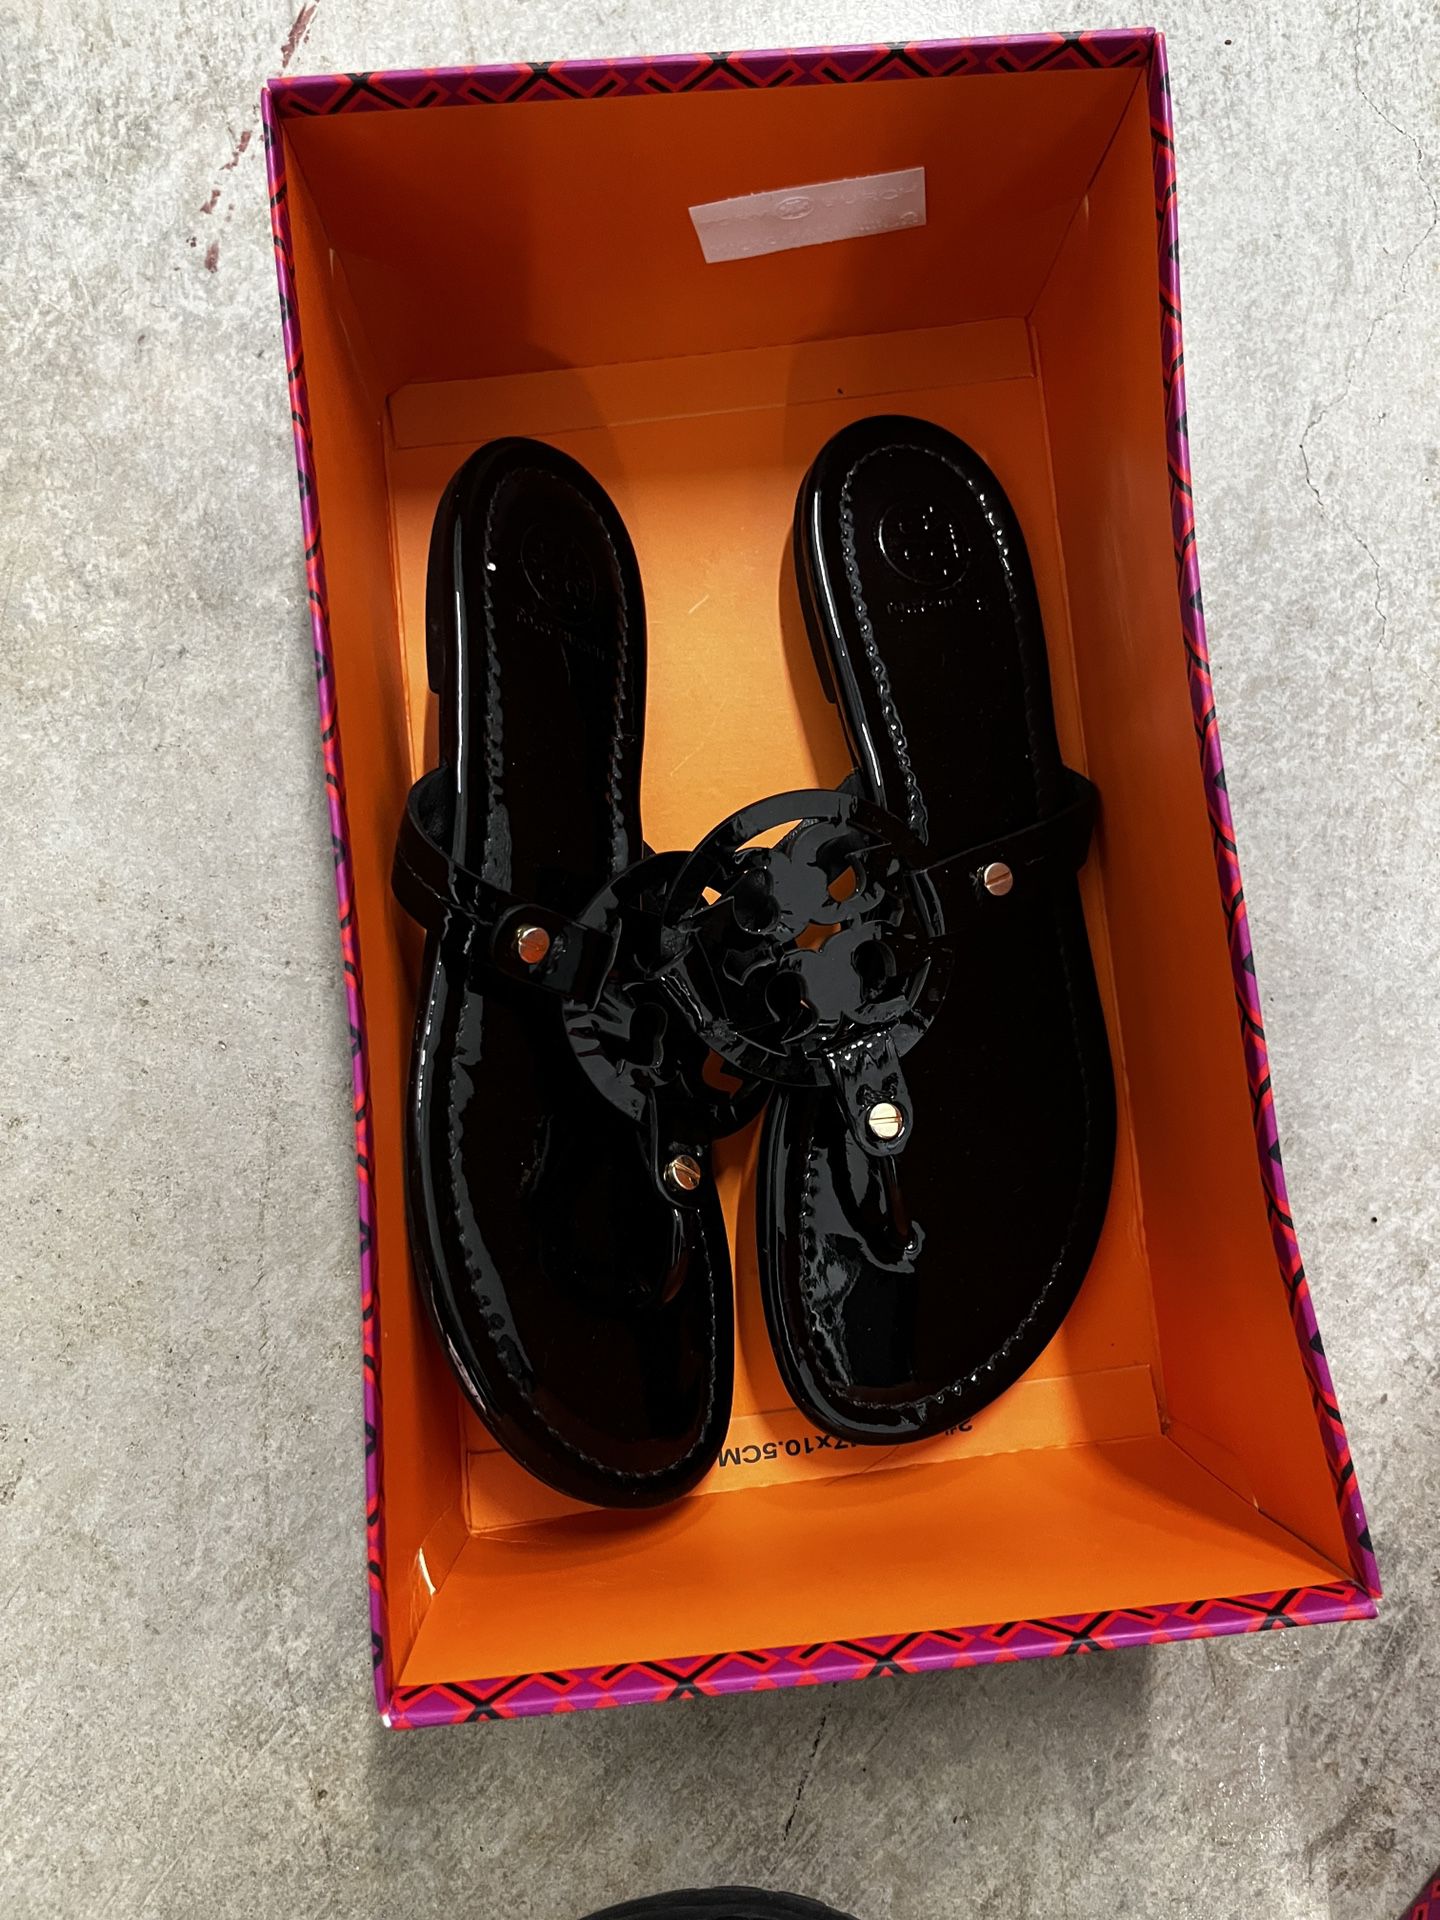 Tory Burch Sandals for Sale in Baltimore, MD - OfferUp